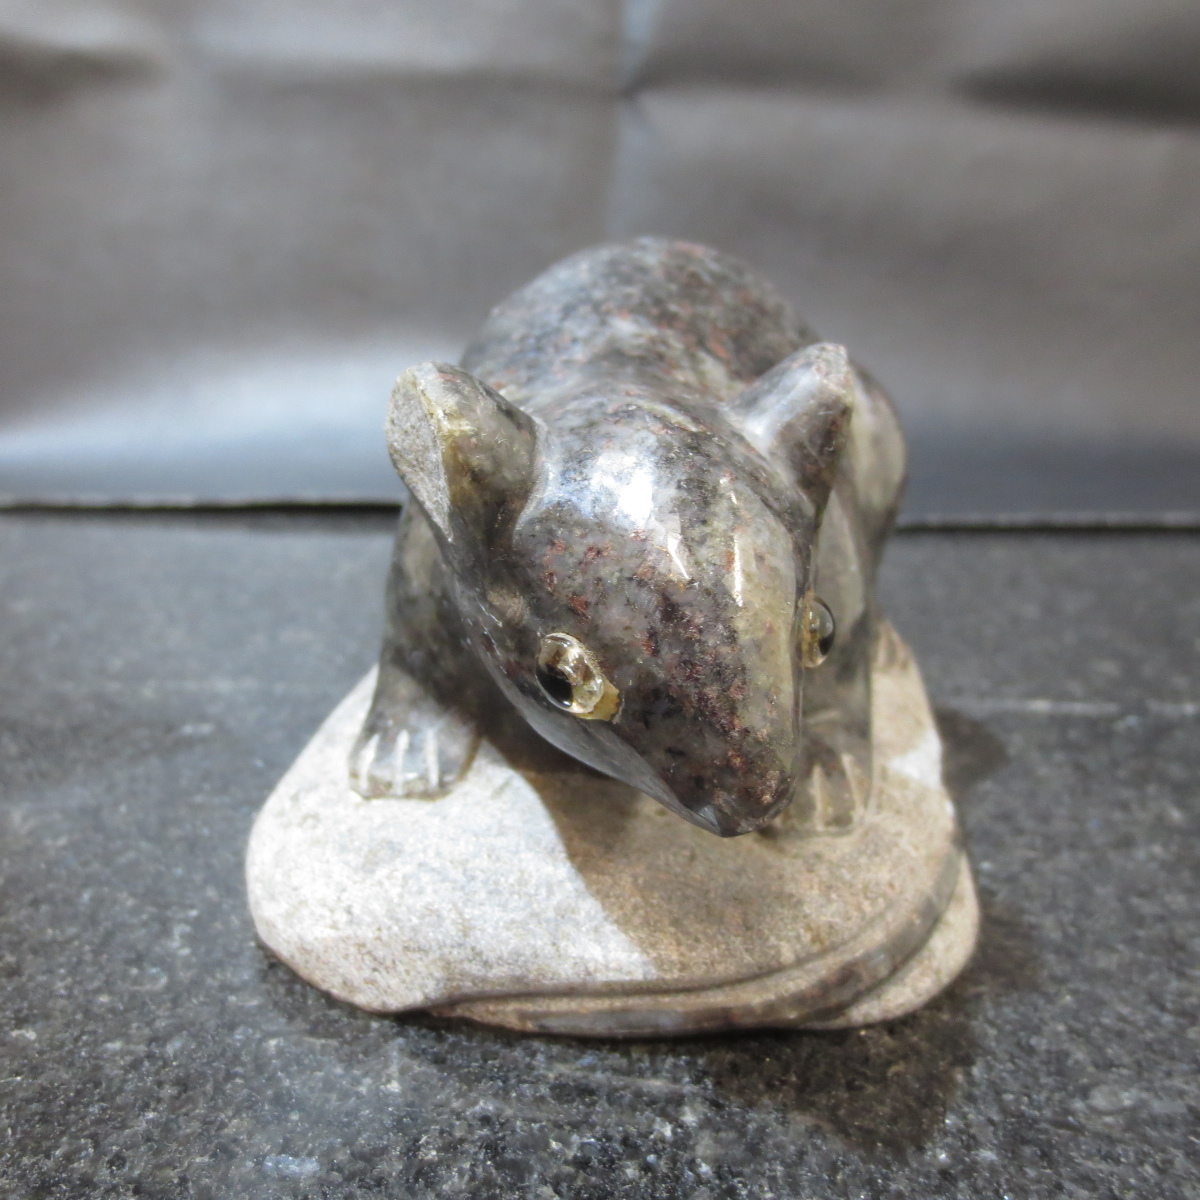  mouse mouse . main . ornament sculpture objet d'art weight . year 10 two main .. stone NZ02 712g free shipping 